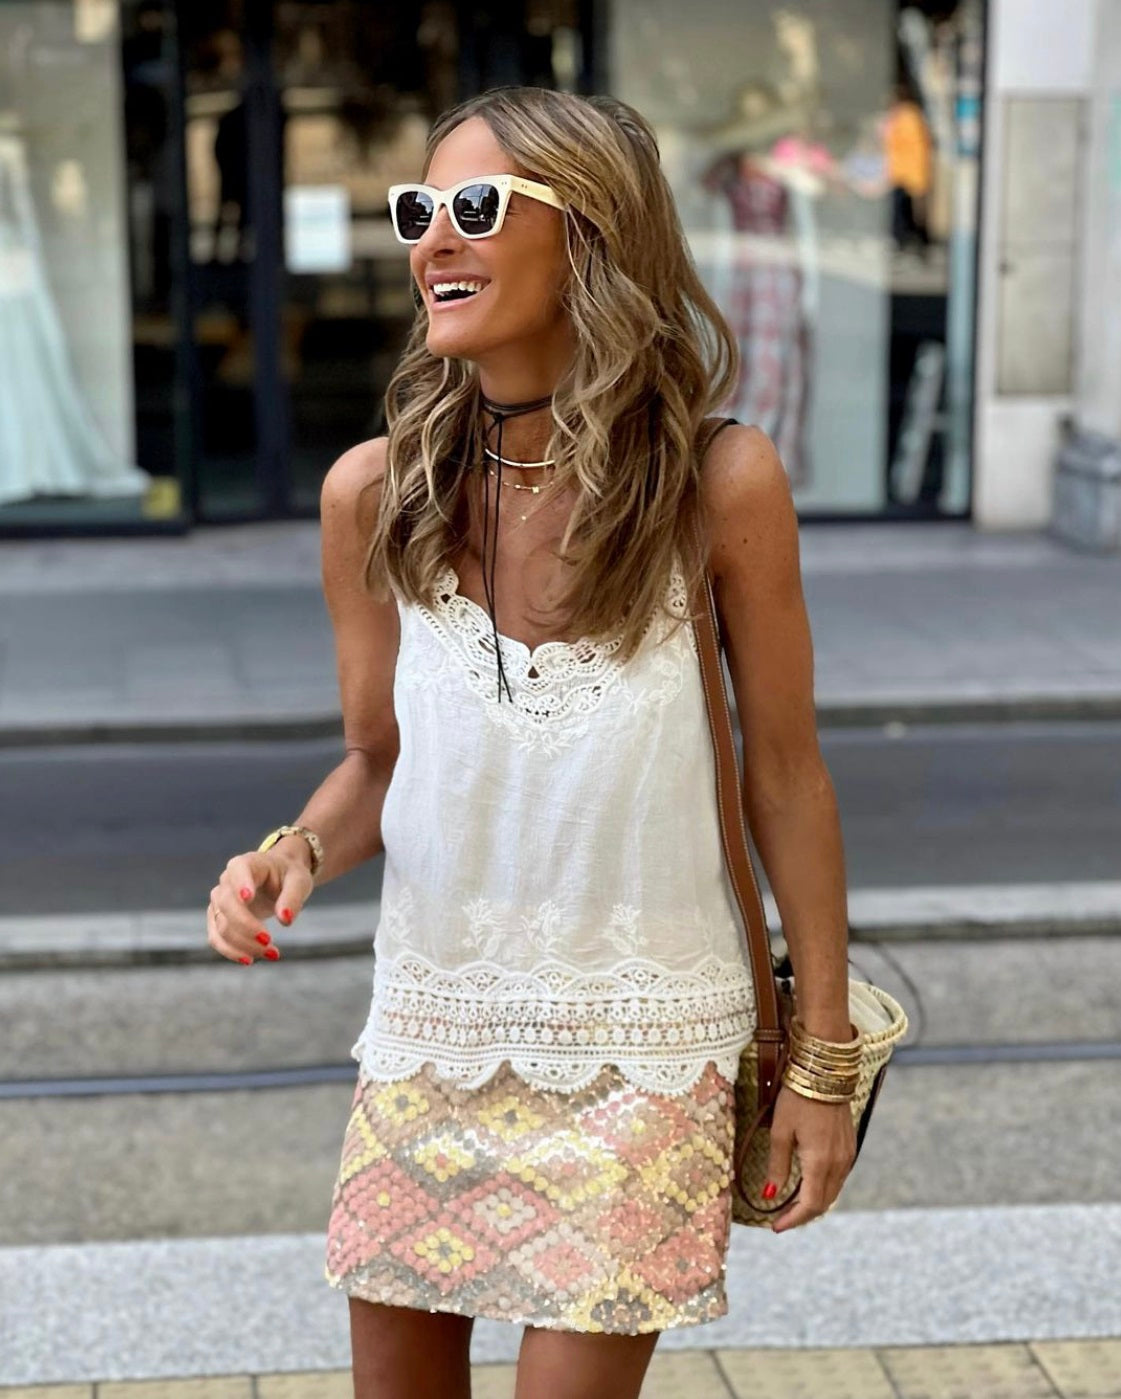 Lace top white